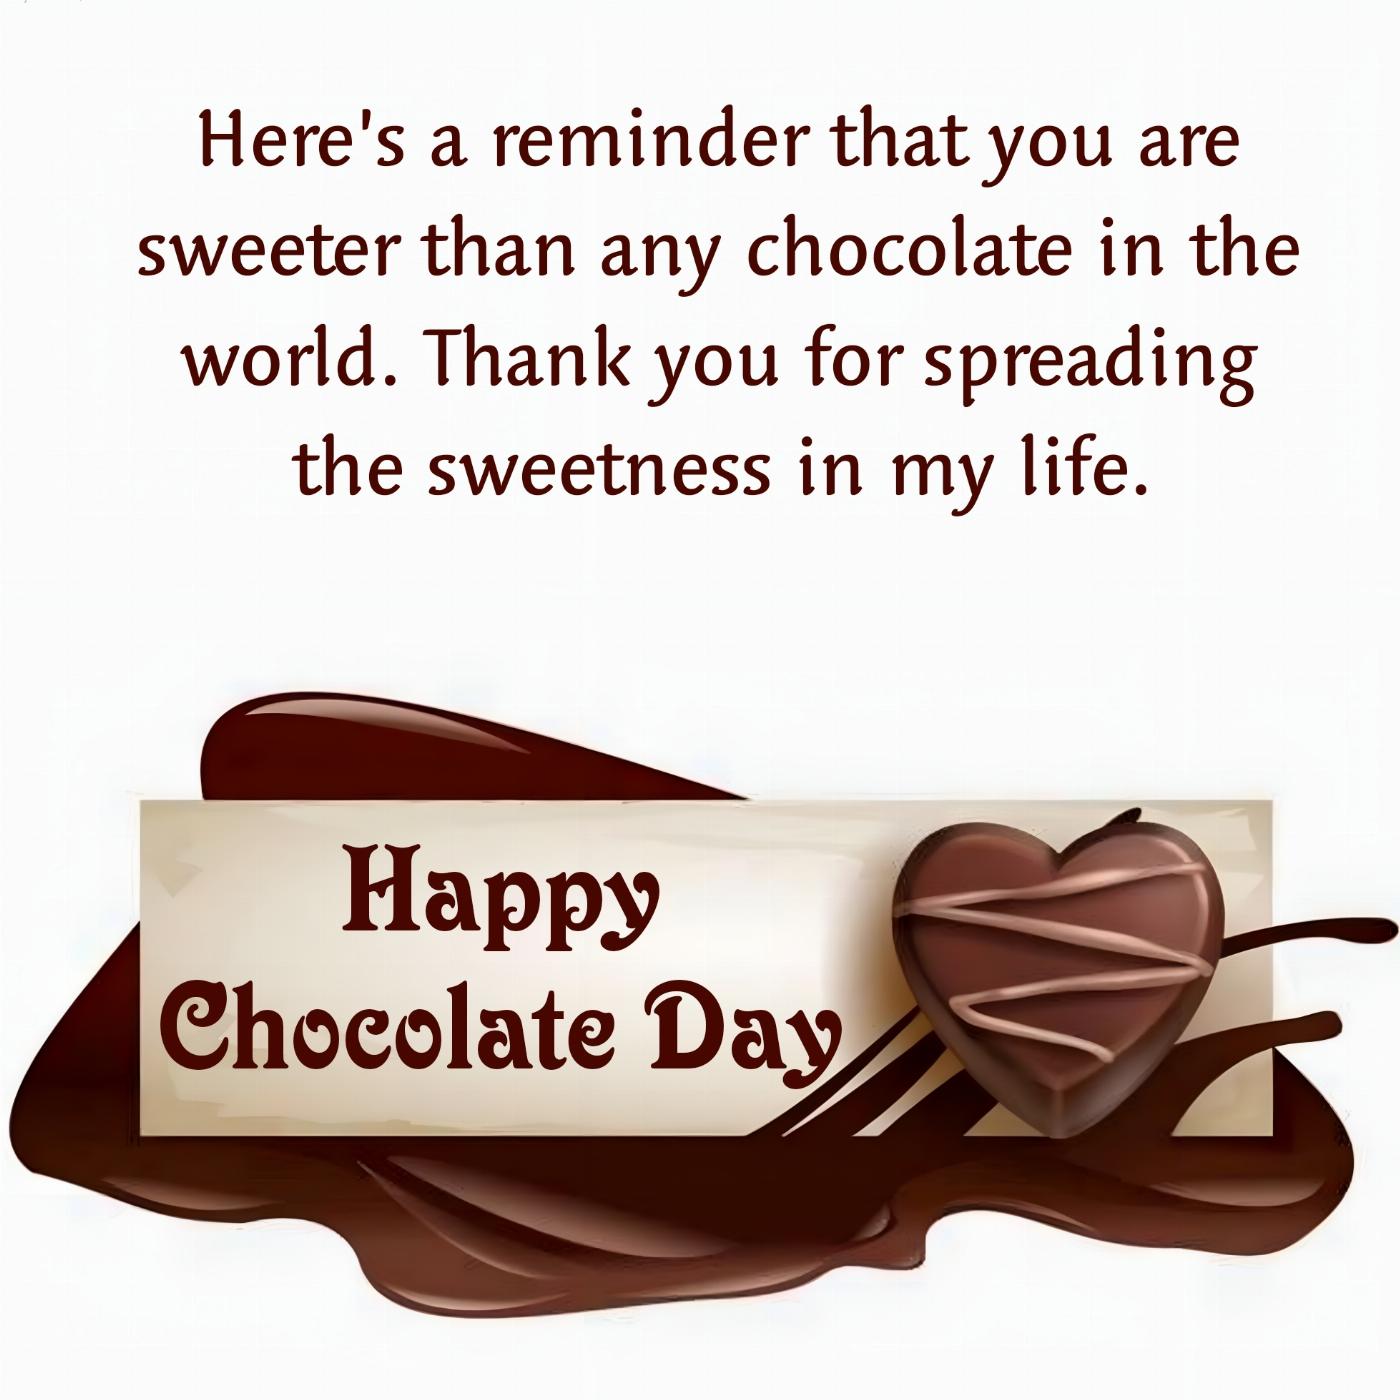 Heres a reminder that you are sweeter than any chocolate